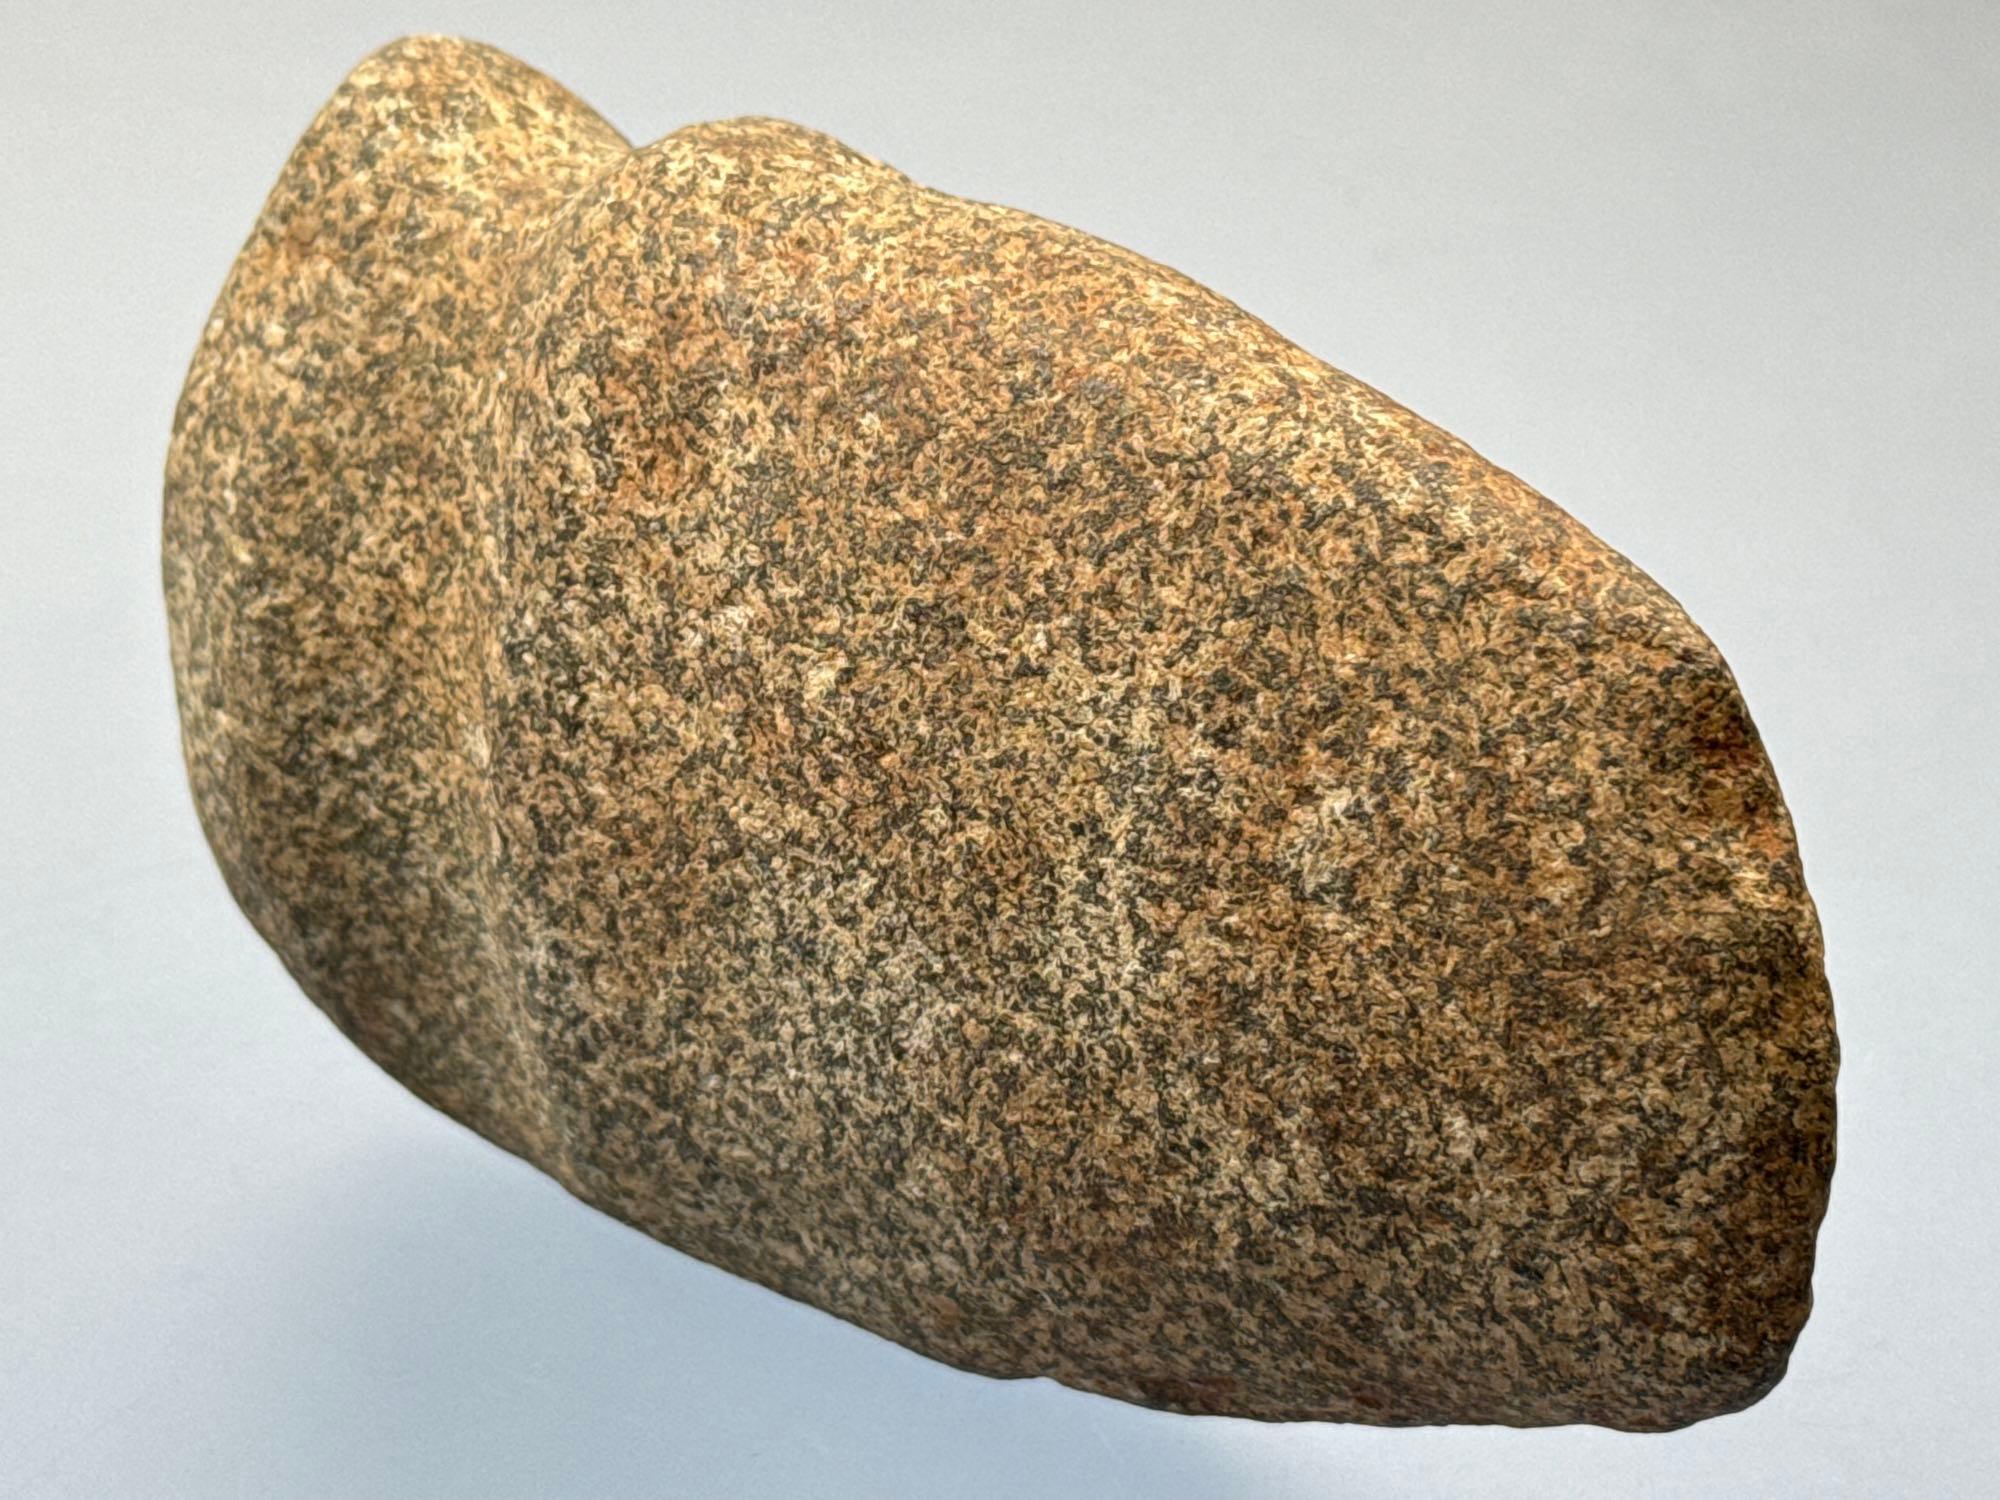 6 1/2" Heavy Hardstone Granite Axe, 3/4 Groove, SITS ON END, Found in Lancaster Co., PA